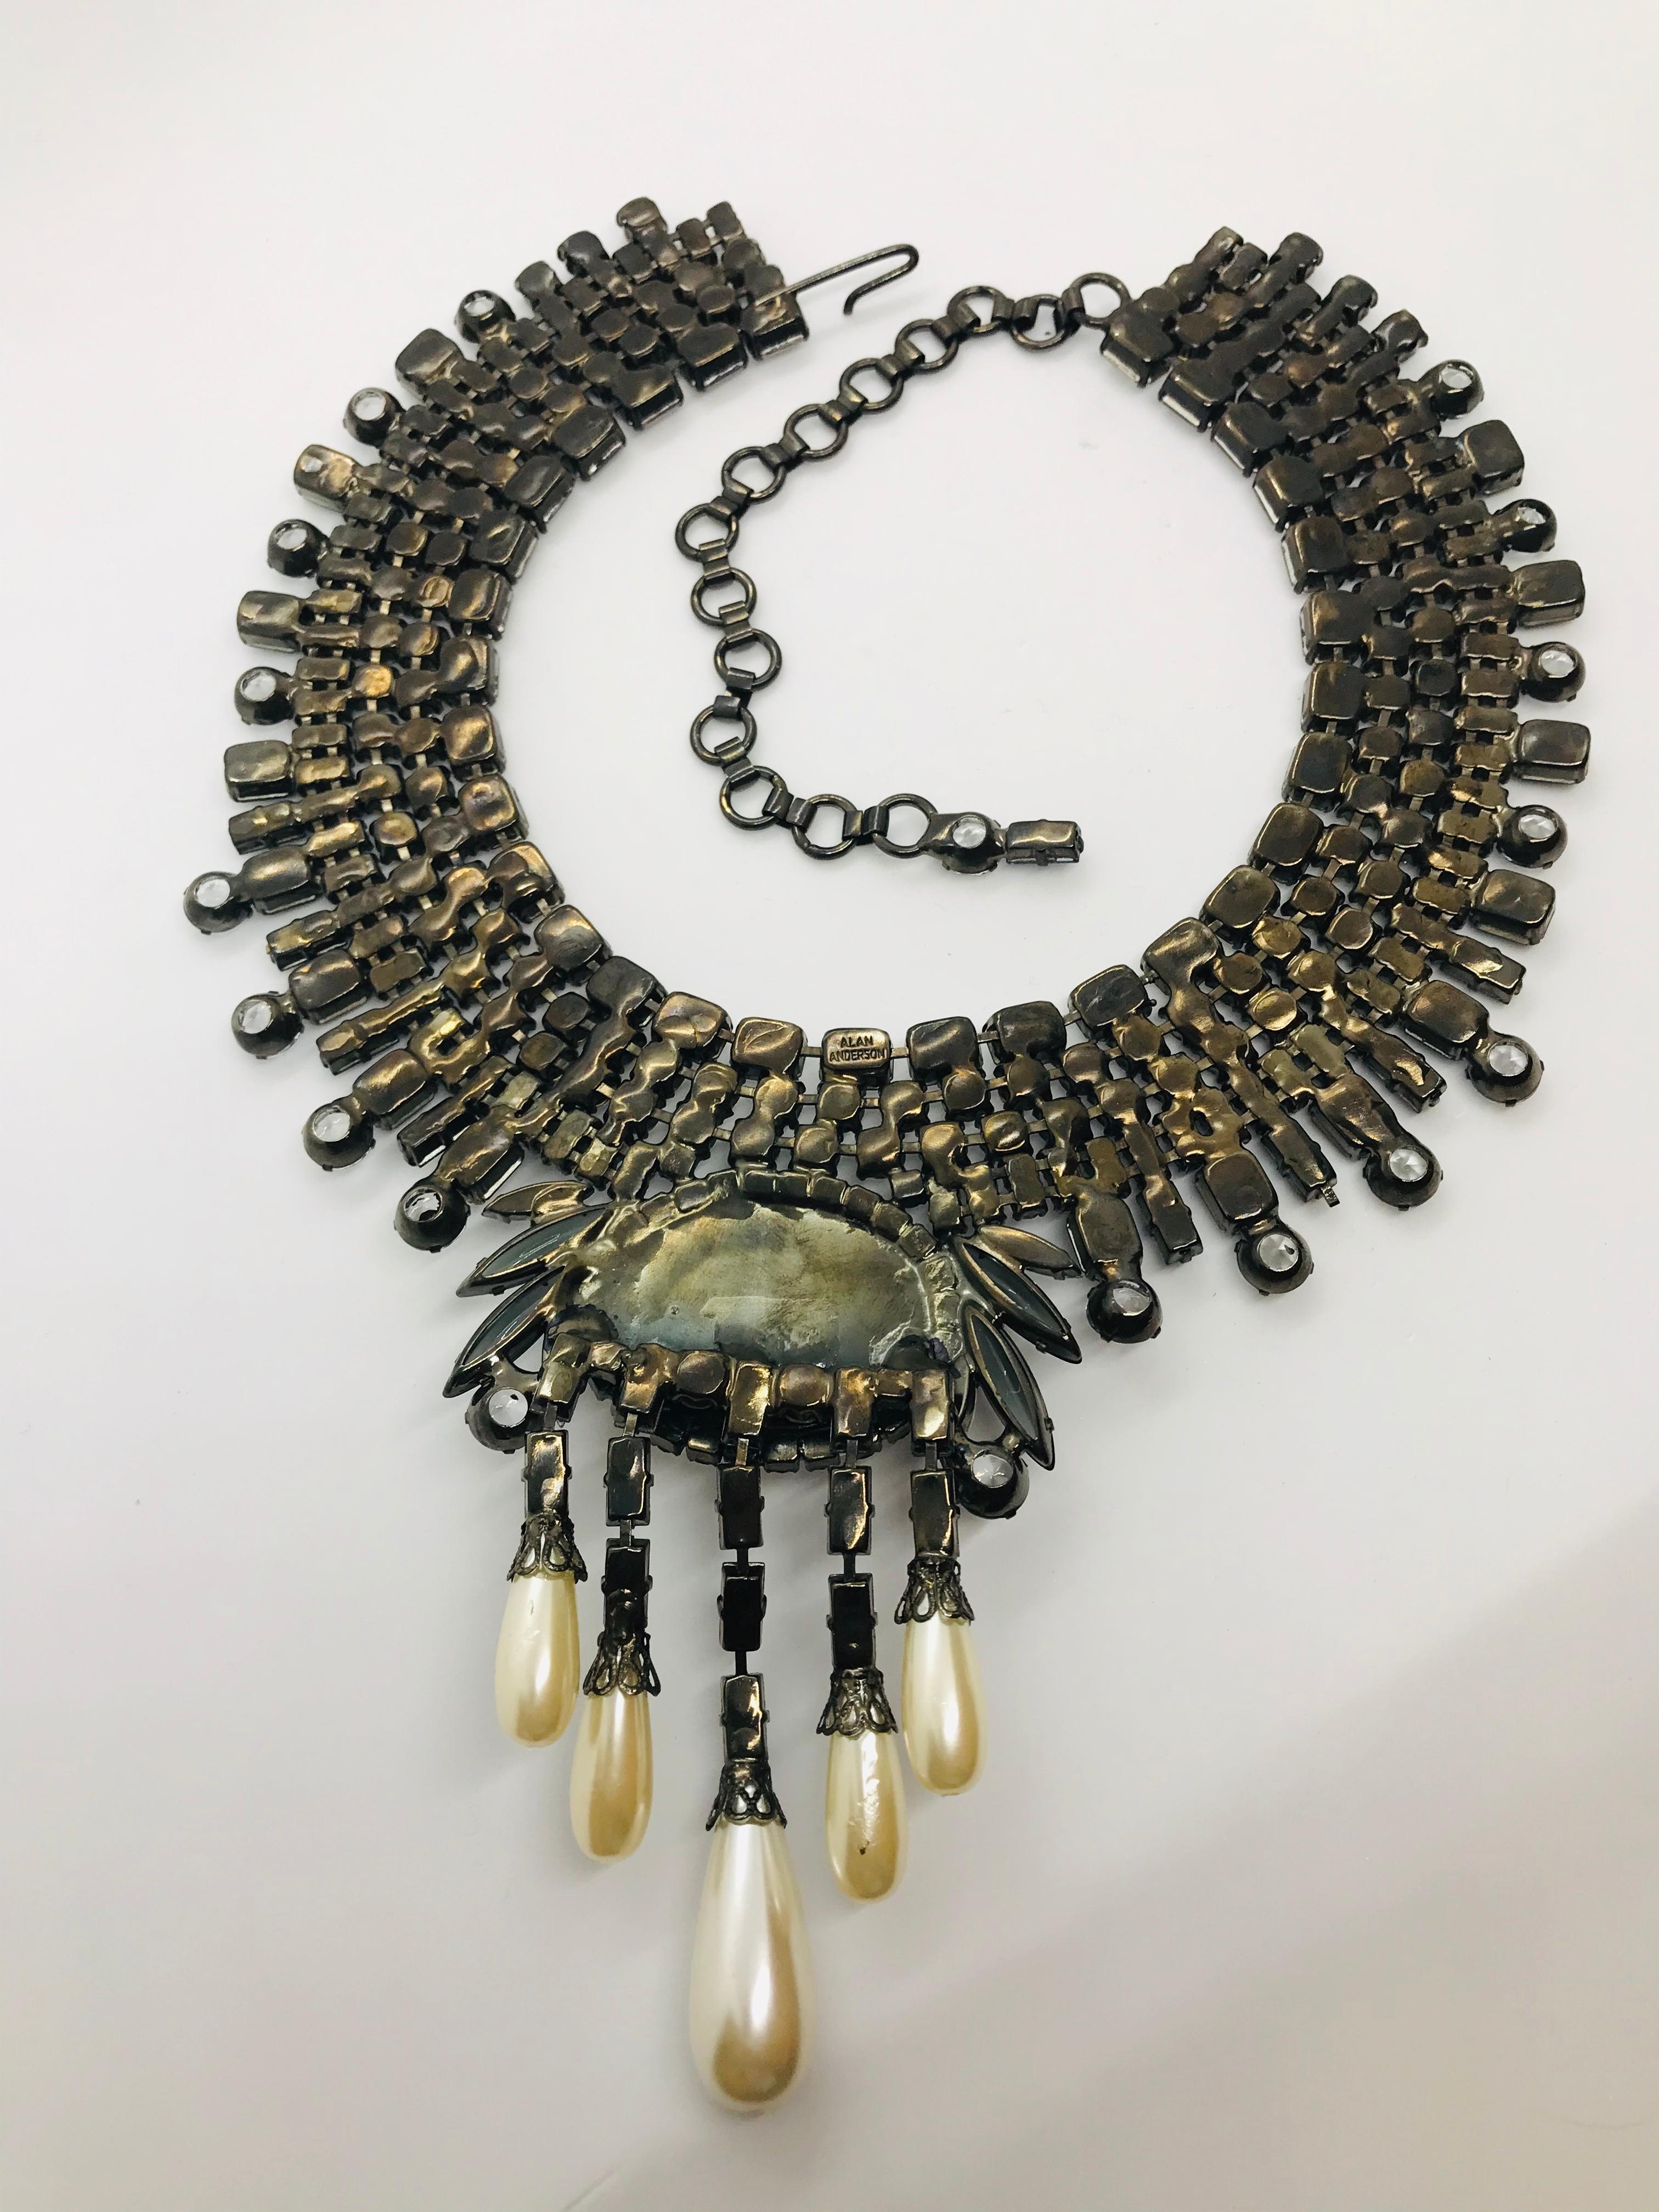 Reminiscent of some of the necklaces produced by the great jewelry houses of the early 20th century this sapphire and clear Austrian crystal mauvé pearl fringed collar necklace captures the period perfectly!  The necklace centers on a medallion with